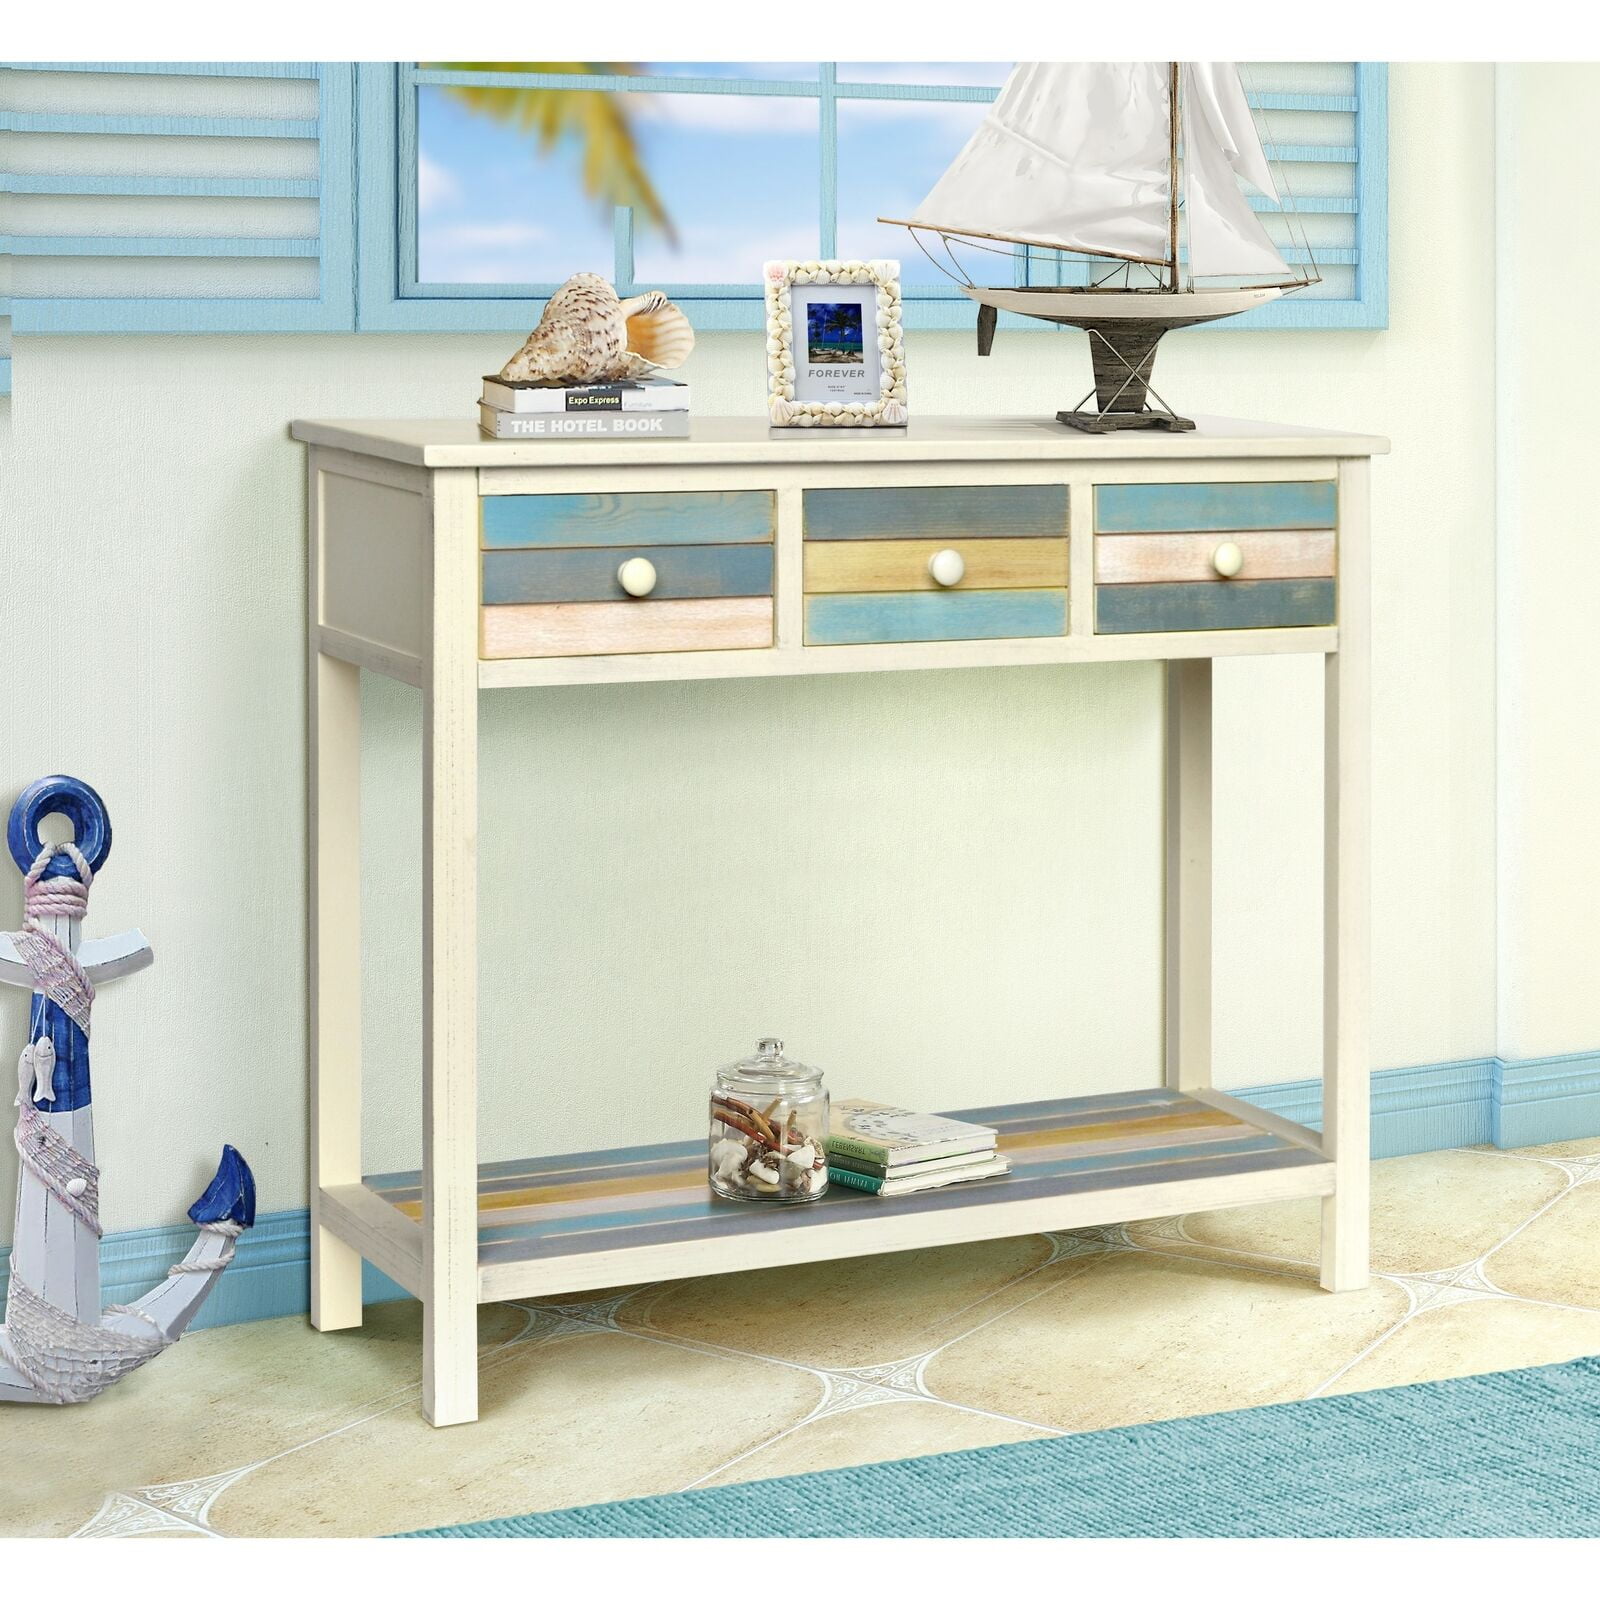 Featured image of post Blue Console Table Decor : Table decorations are especially useful if you are.